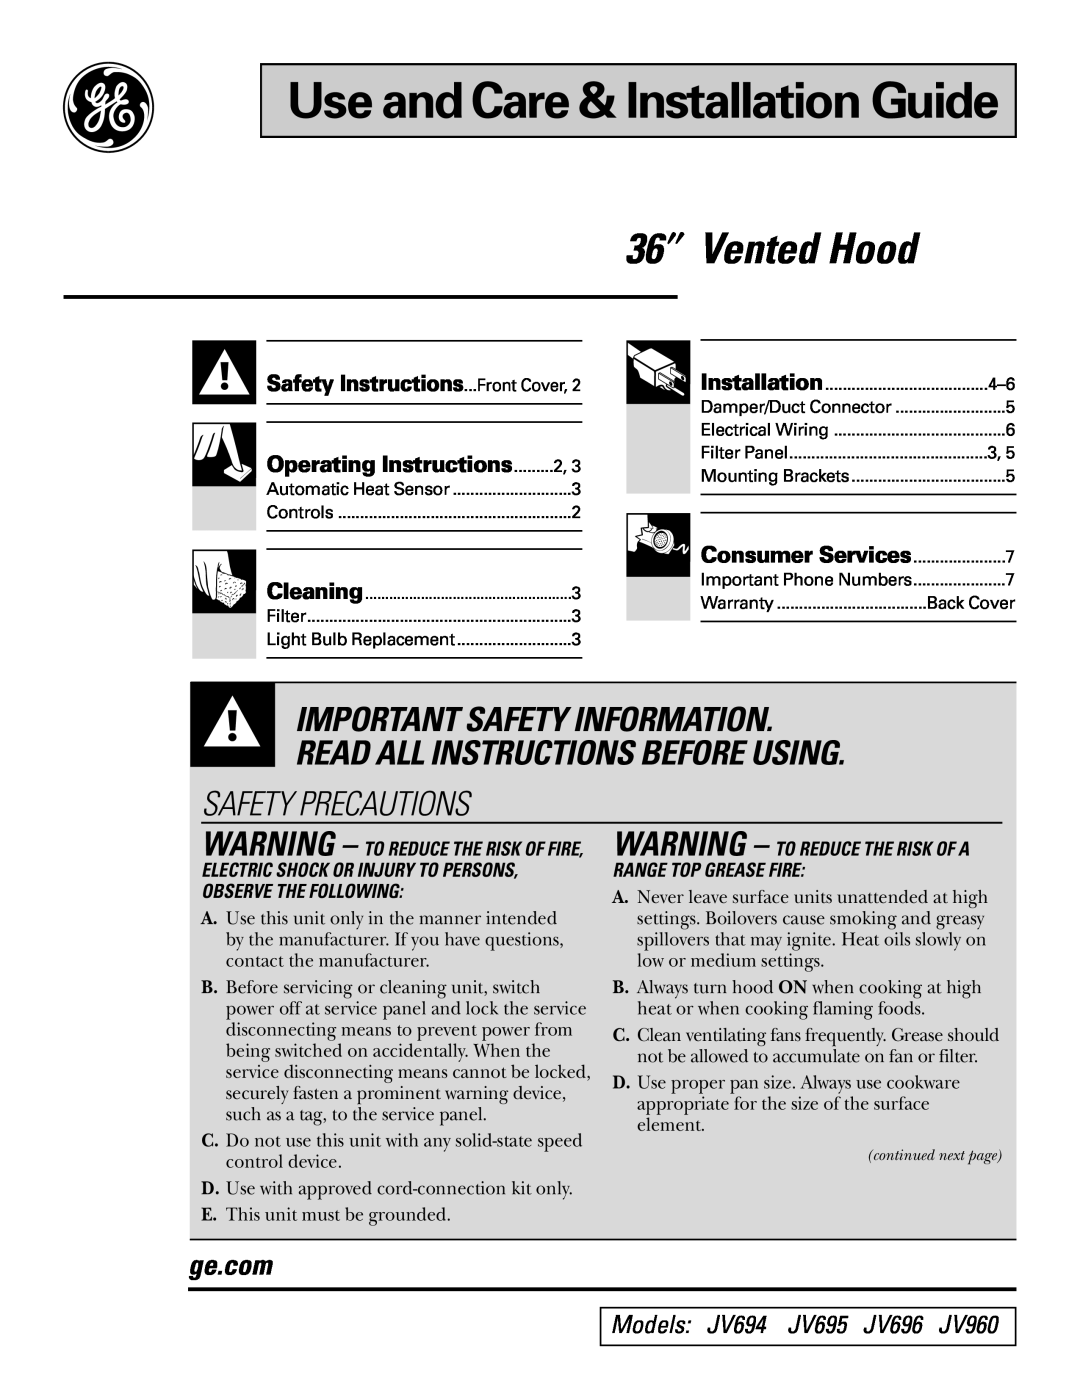 GE JV695 operating instructions Safety Precautions, Important Safety Information. Read All Instructions Before Using 